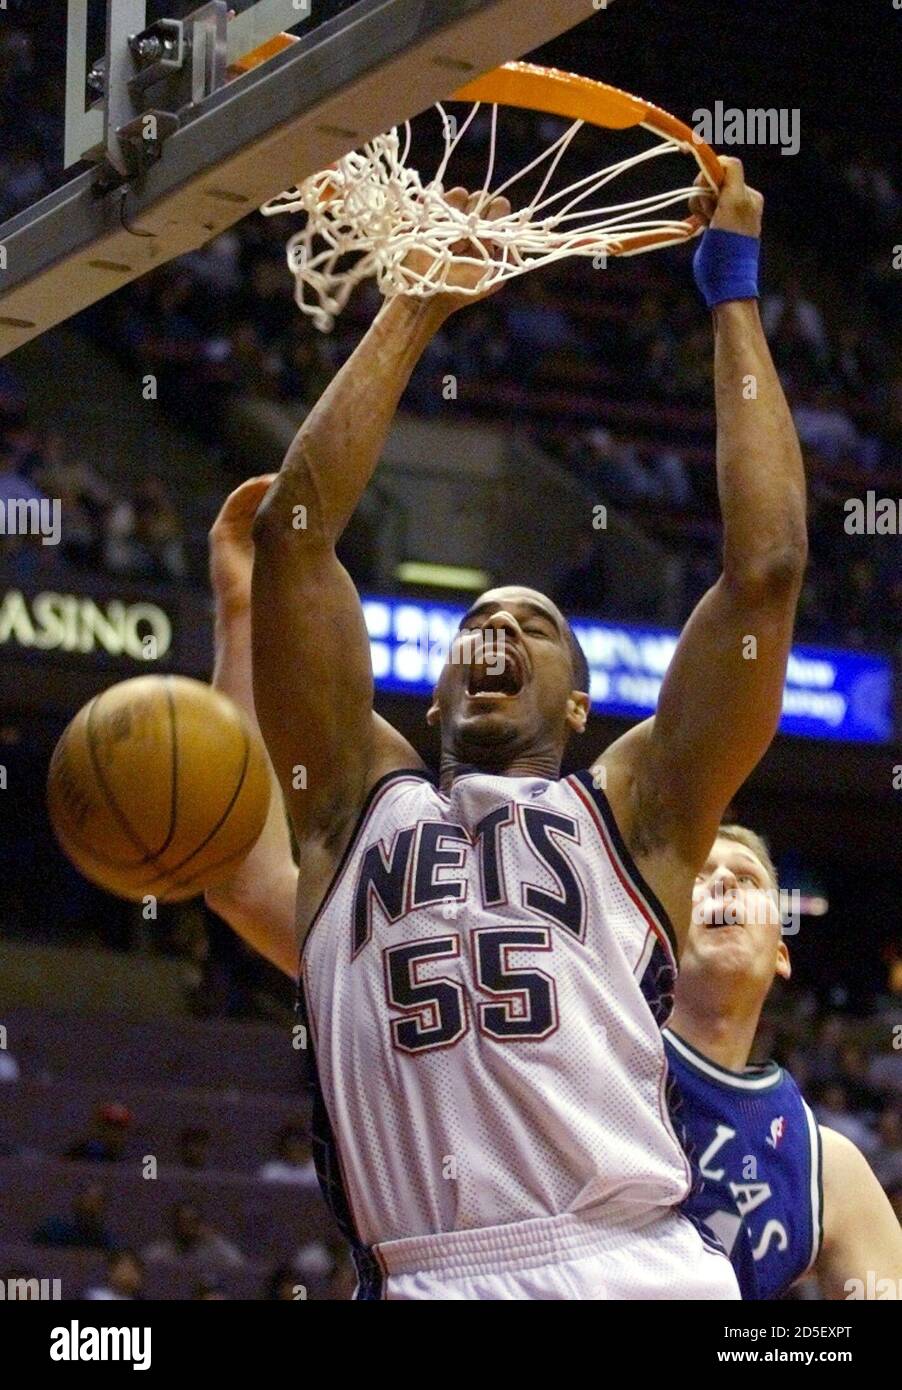 New Jersey Nets center Jayson Williams (55) stuffs the ball in front of  Dallas Mavericks center Shawn Bradley in the fourth period of their NBA  game, March 17 at the Meadowlands Arena